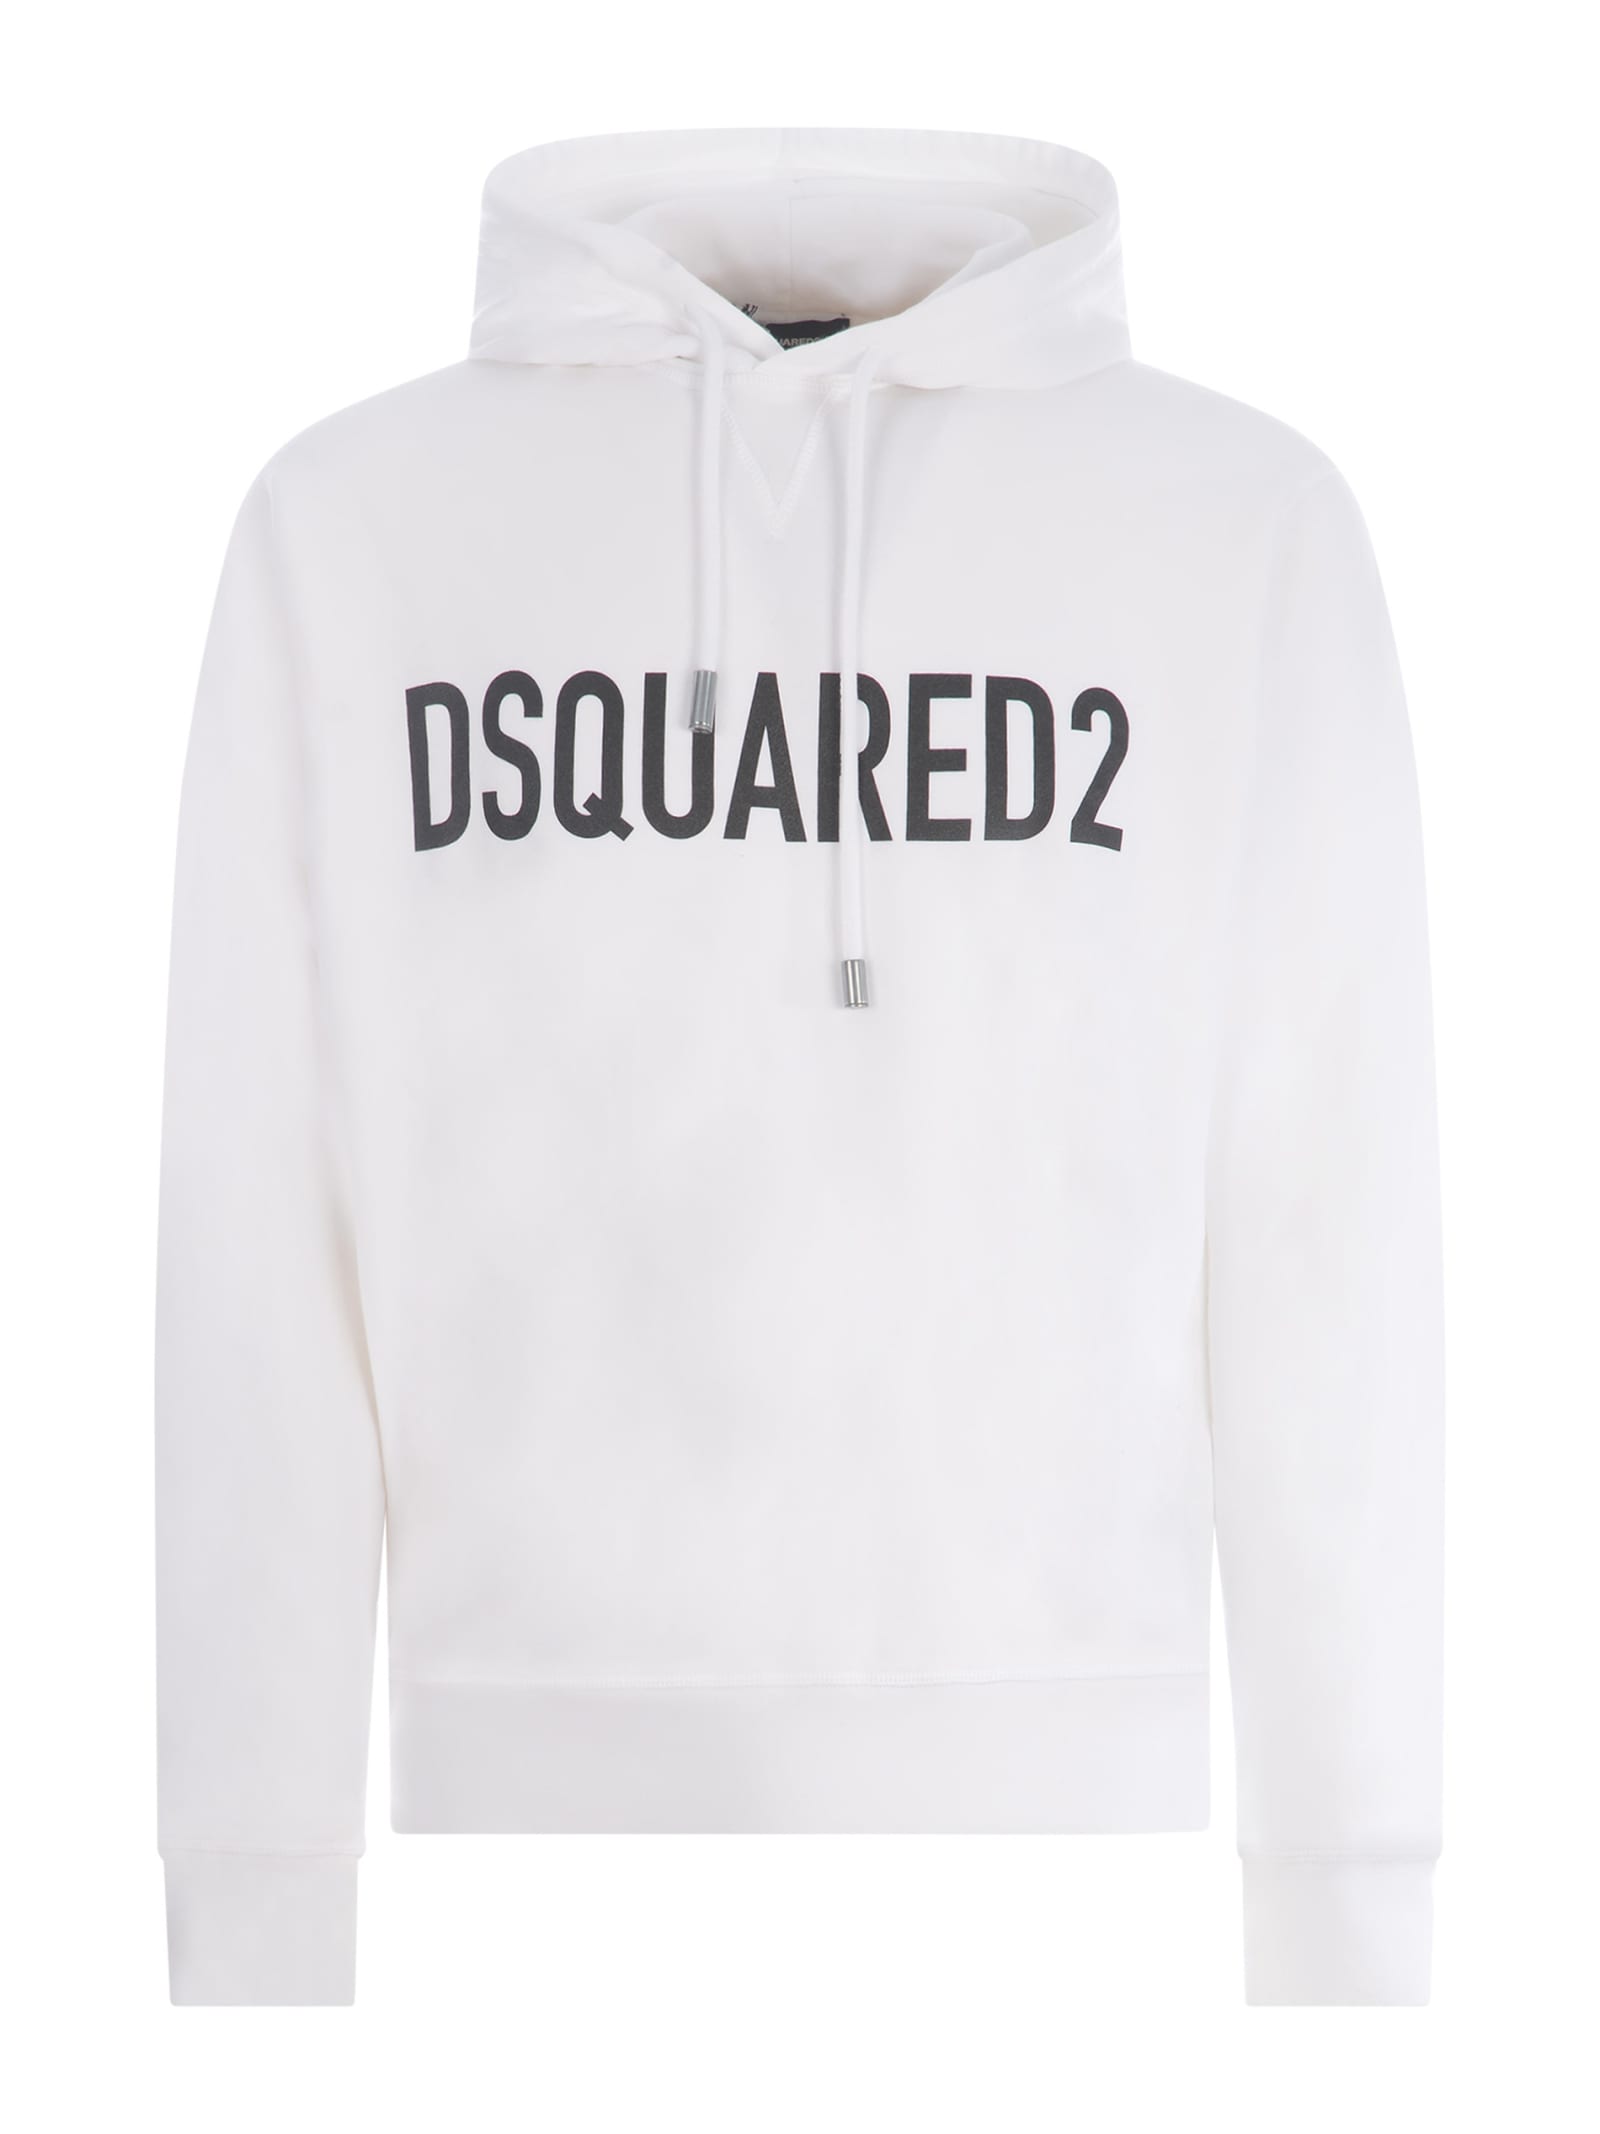 Dsquared2 Hooded Sweatshirt  In Cotton In White